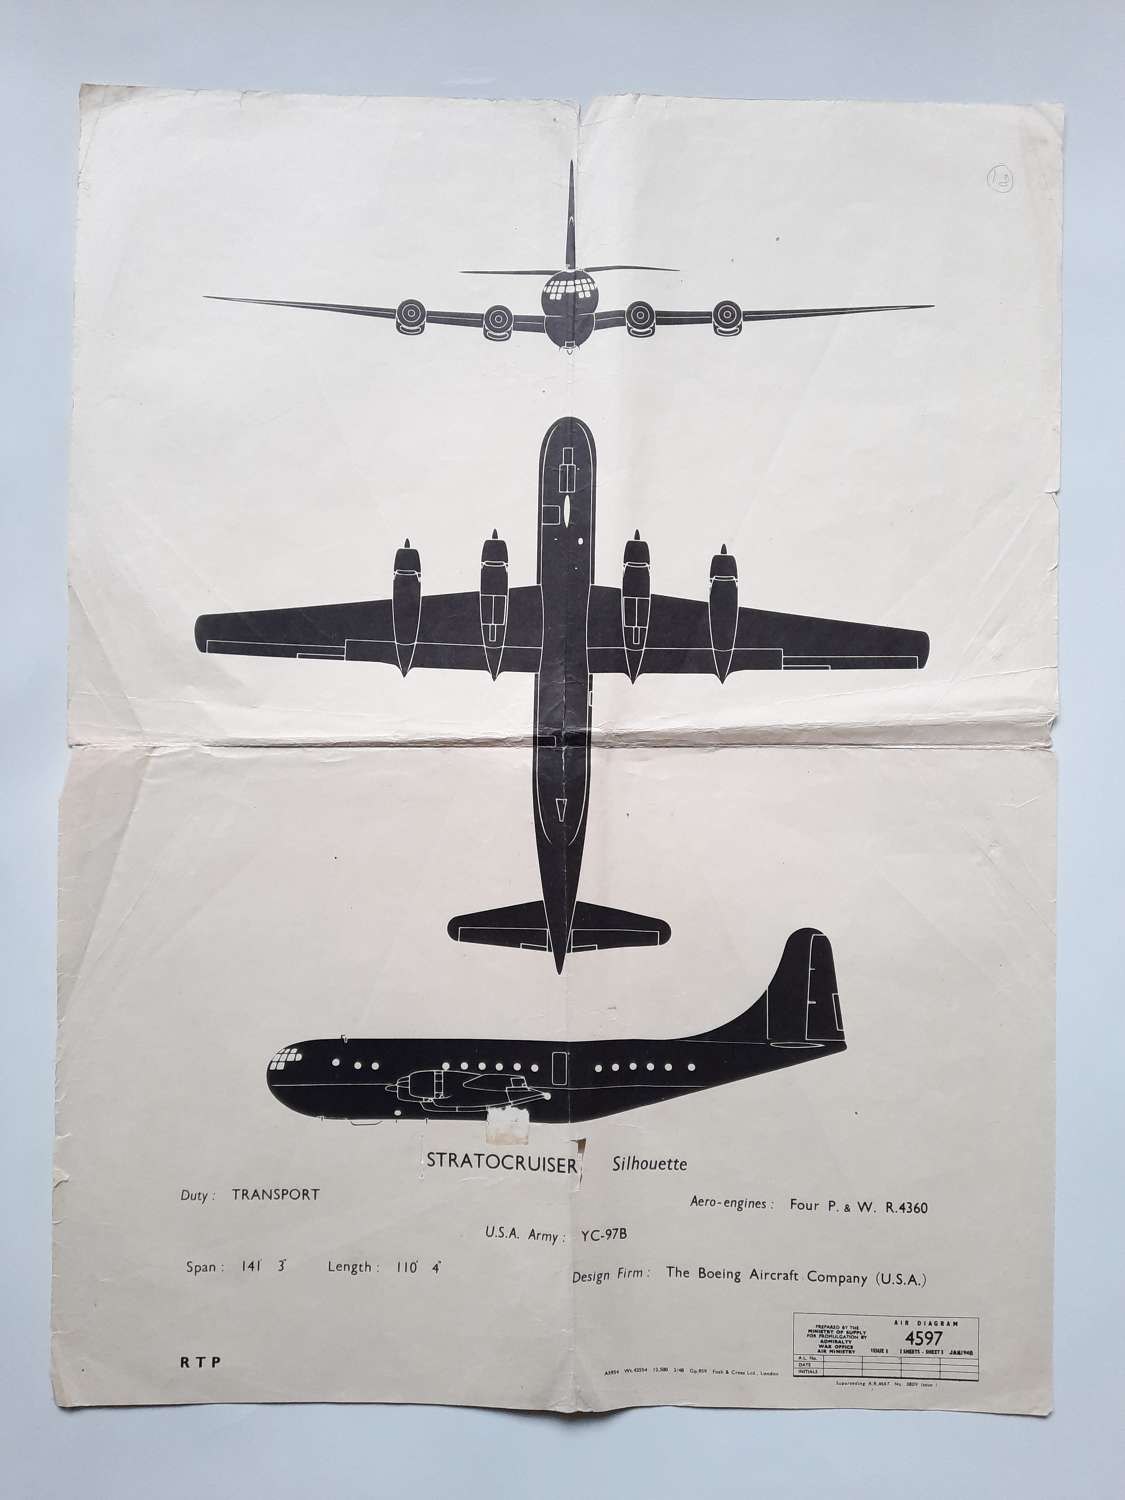 Stratocruiser Recognition Poster